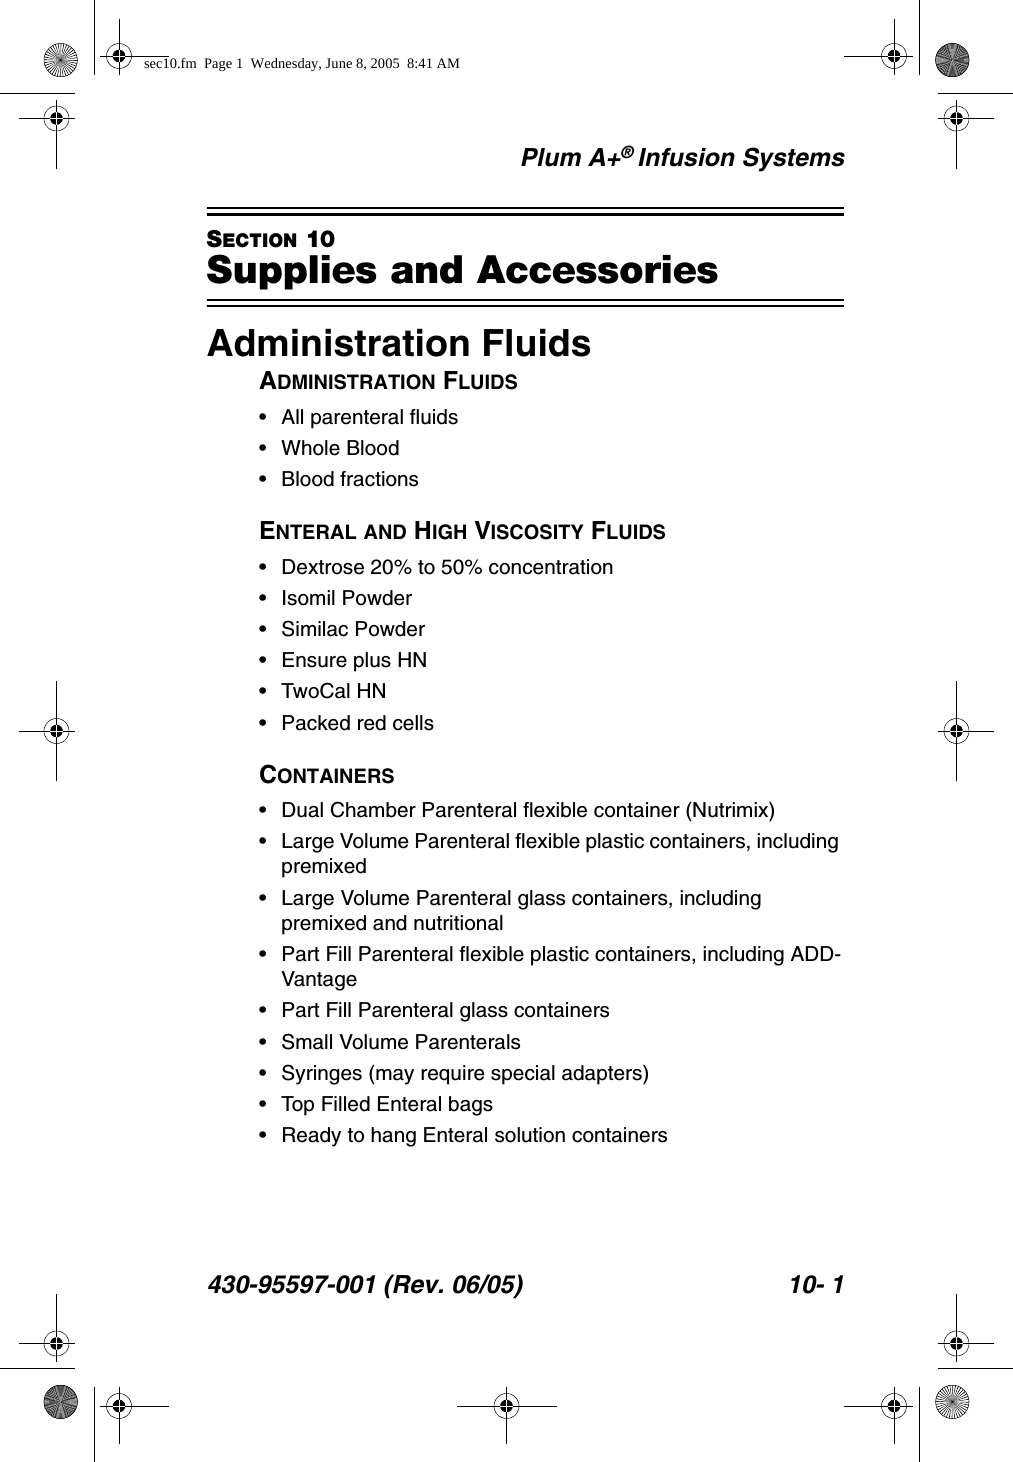 Plum A+® Infusion Systems430-95597-001 (Rev. 06/05) 10- 1SECTION 10Supplies and AccessoriesAdministration FluidsADMINISTRATION FLUIDS• All parenteral fluids• Whole Blood• Blood fractionsENTERAL AND HIGH VISCOSITY FLUIDS• Dextrose 20% to 50% concentration• Isomil Powder• Similac Powder• Ensure plus HN• TwoCal HN• Packed red cellsCONTAINERS• Dual Chamber Parenteral flexible container (Nutrimix)• Large Volume Parenteral flexible plastic containers, including premixed• Large Volume Parenteral glass containers, including premixed and nutritional• Part Fill Parenteral flexible plastic containers, including ADD-Vantage• Part Fill Parenteral glass containers• Small Volume Parenterals• Syringes (may require special adapters)• Top Filled Enteral bags• Ready to hang Enteral solution containerssec10.fm  Page 1  Wednesday, June 8, 2005  8:41 AM